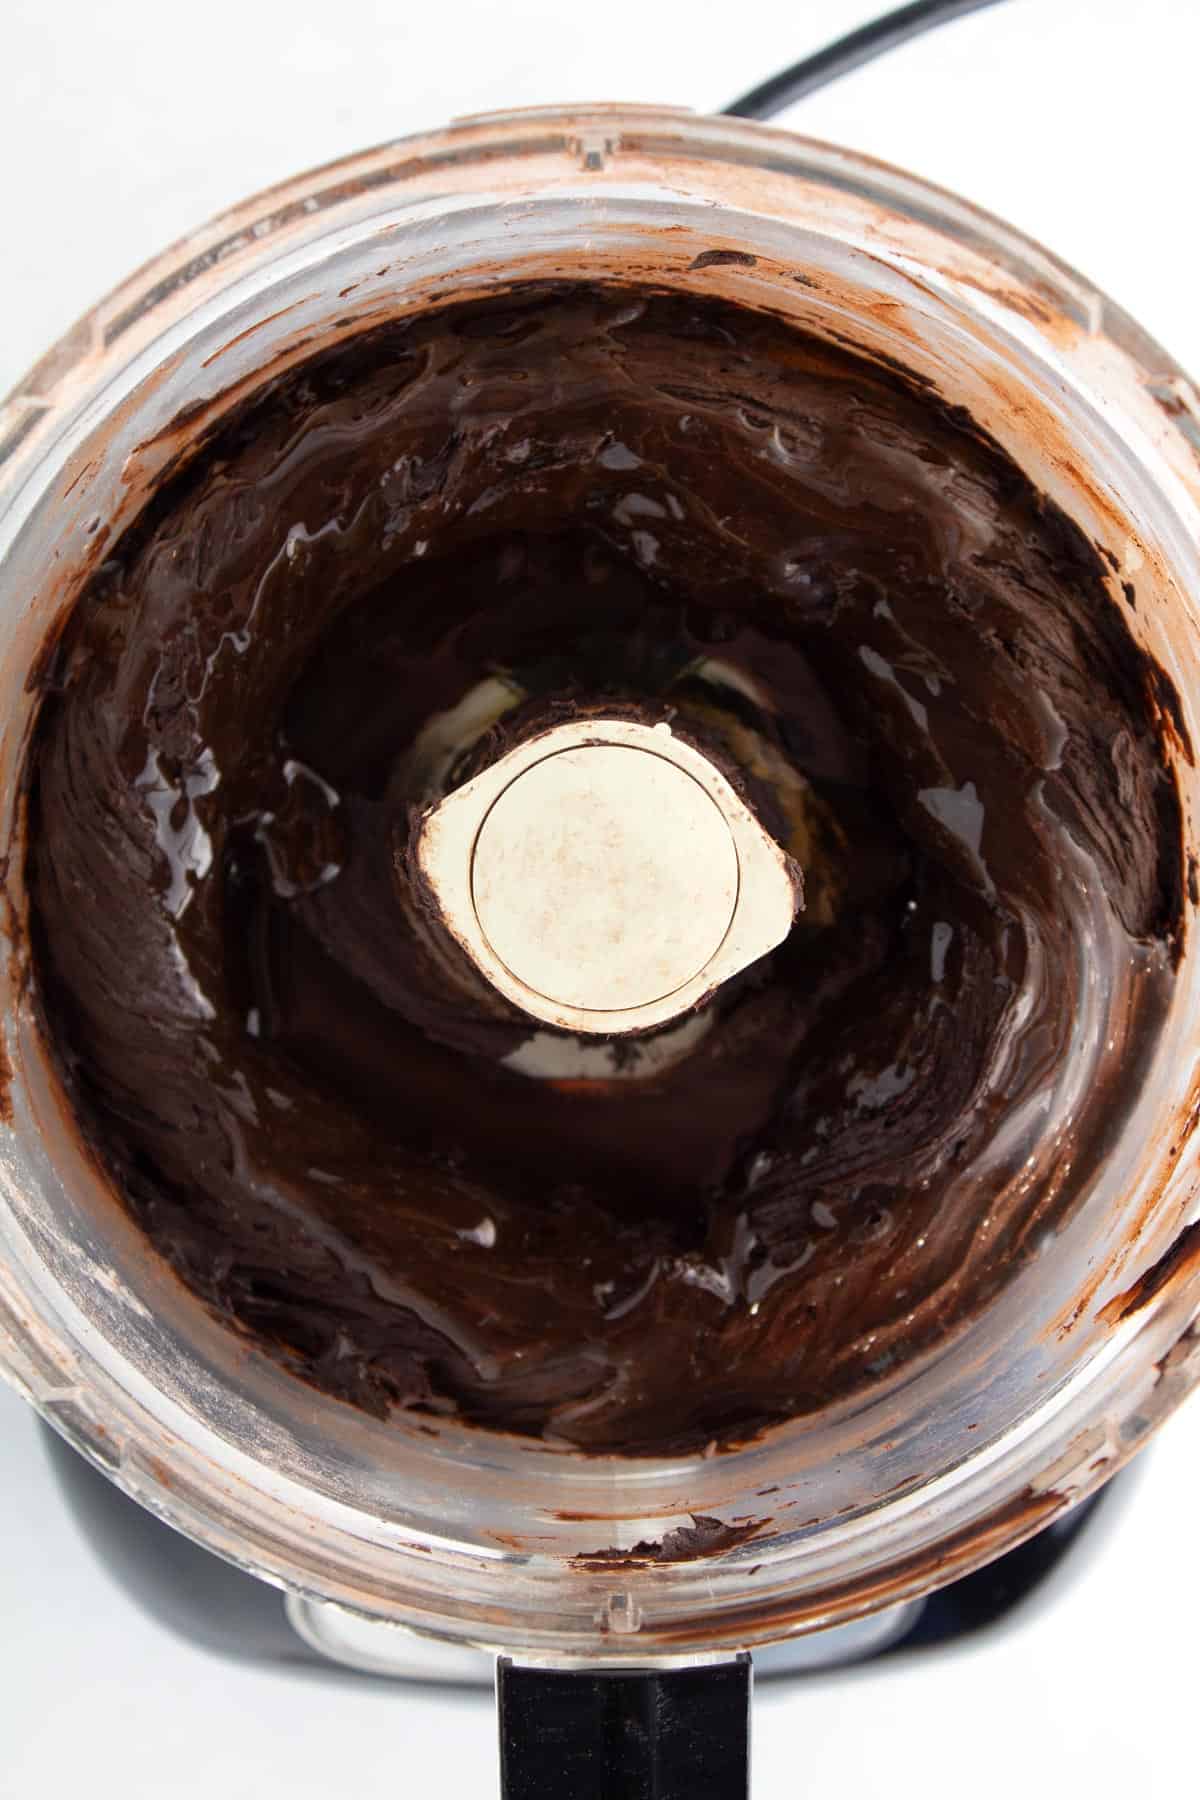 Chocolate frosting in a food processor with corn syrup poured on top.